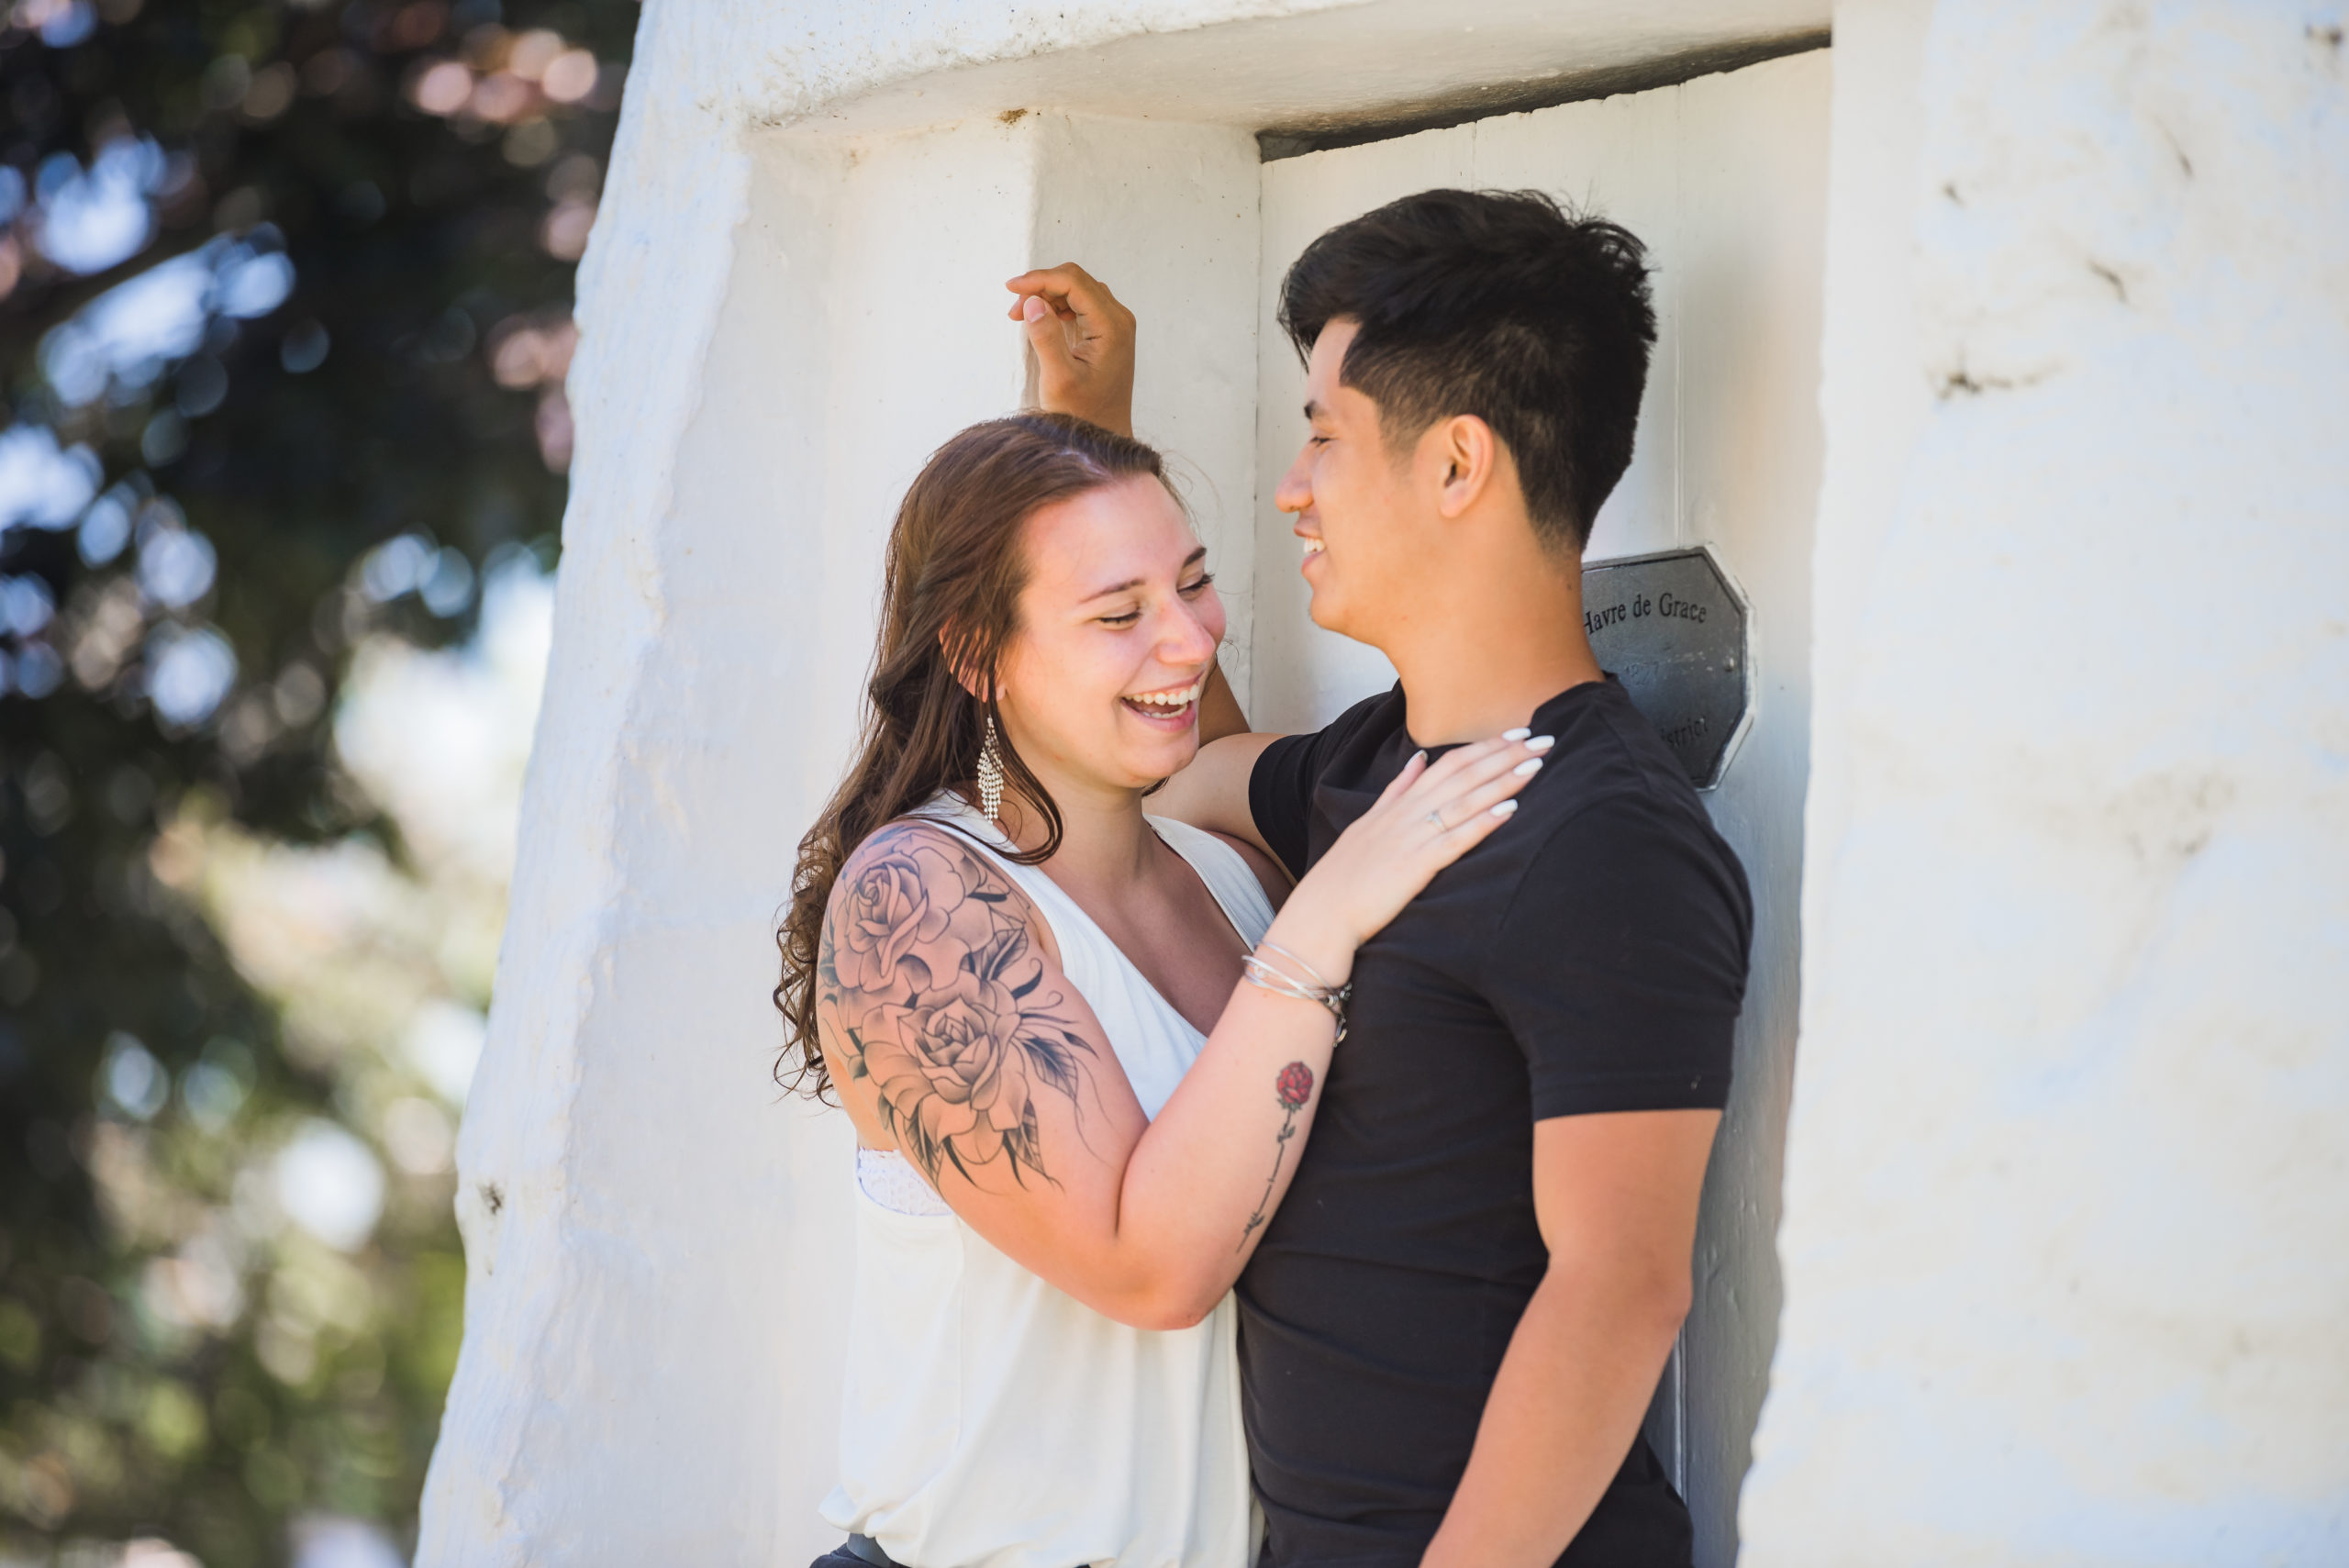 Romantic Engagement Photos at Concord Point | Baltimore Engagement Photography